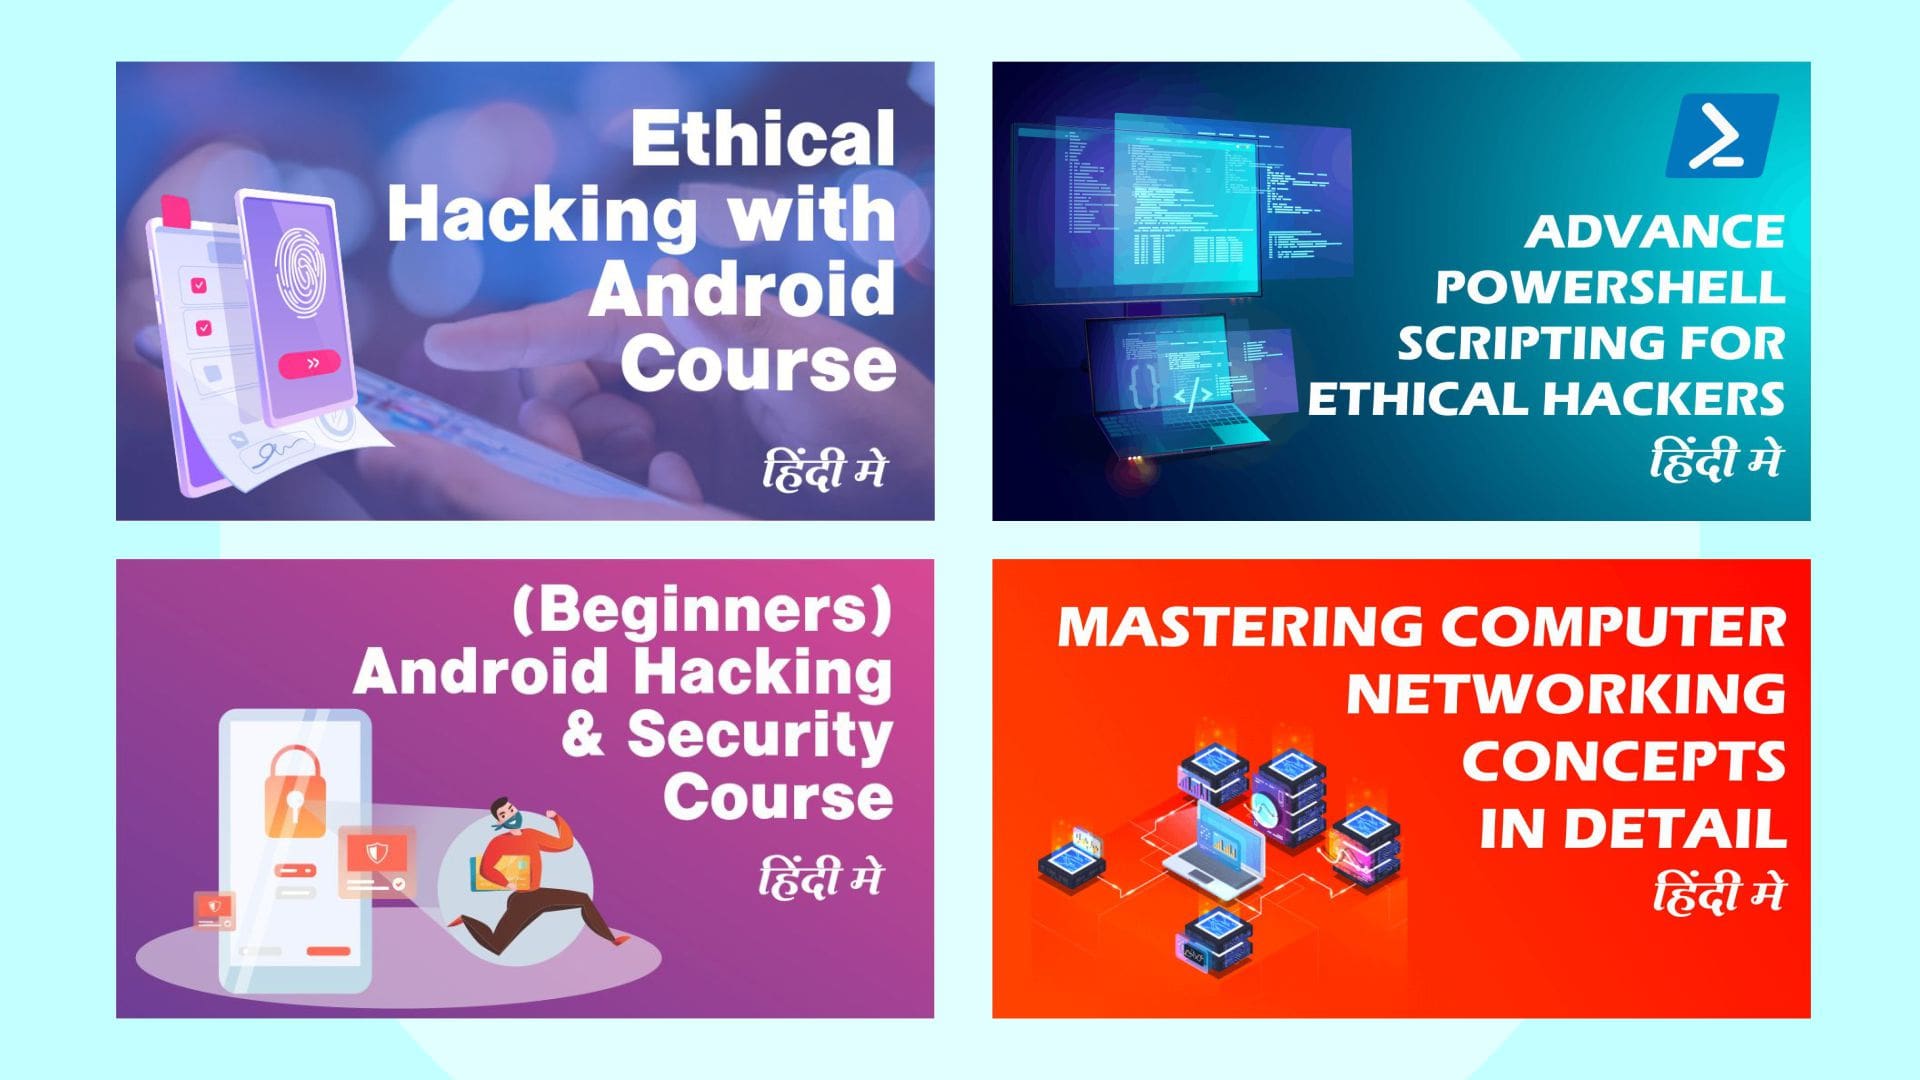 Hacking With Android + (Beginners) Android Hacking + Networking + Powershell Scripting 